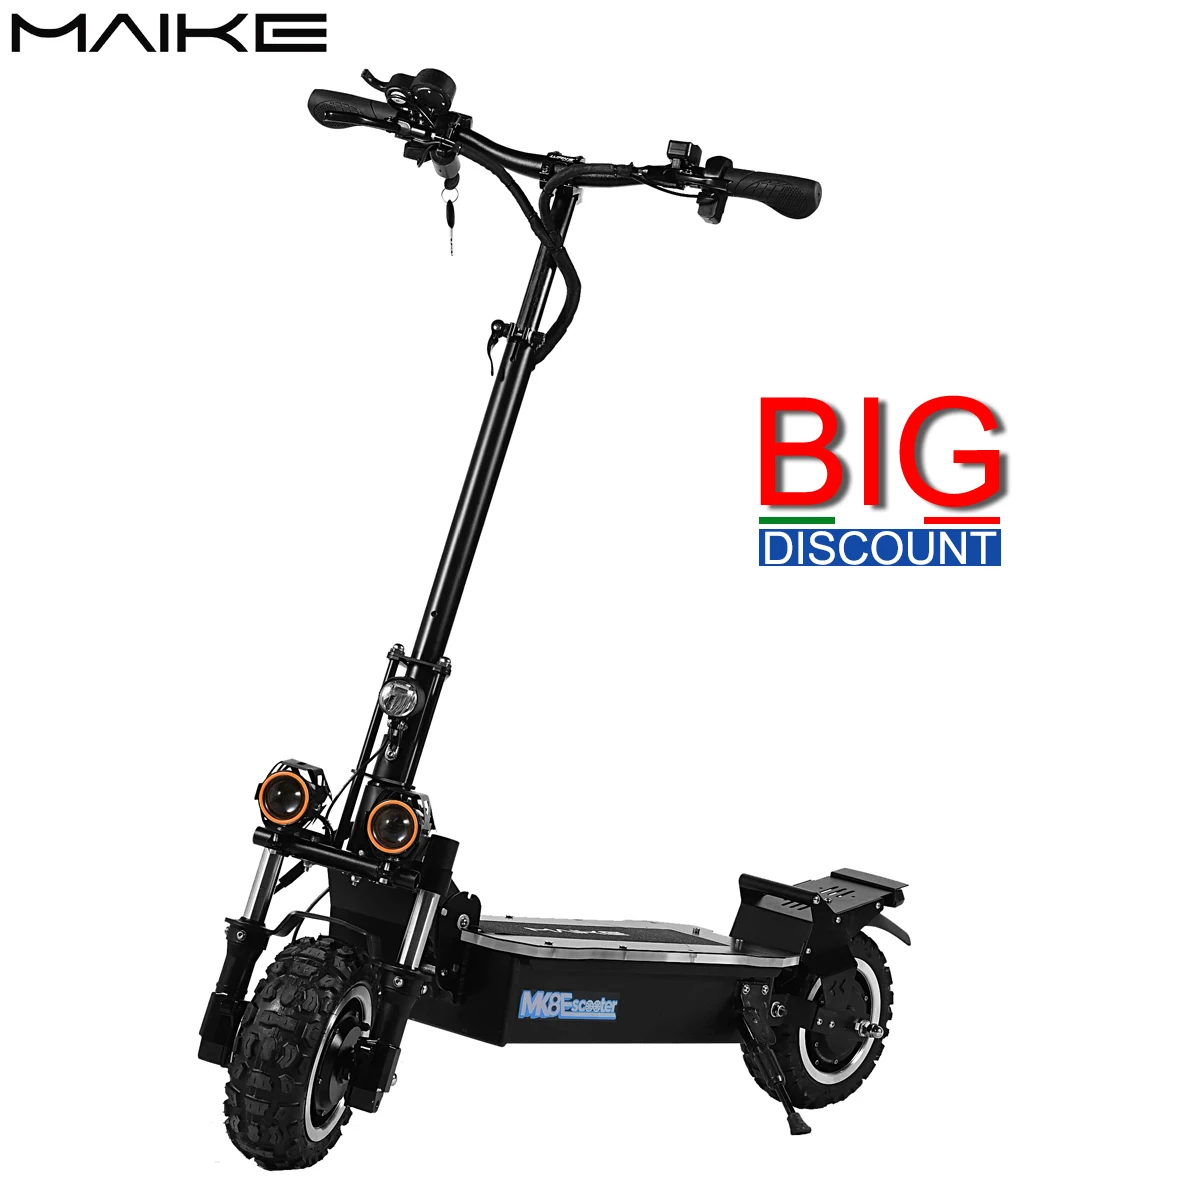 

High Quality Cheap maike mk8 oem electric scooter 5000w double hub motor scooter off road electric scooter for adults